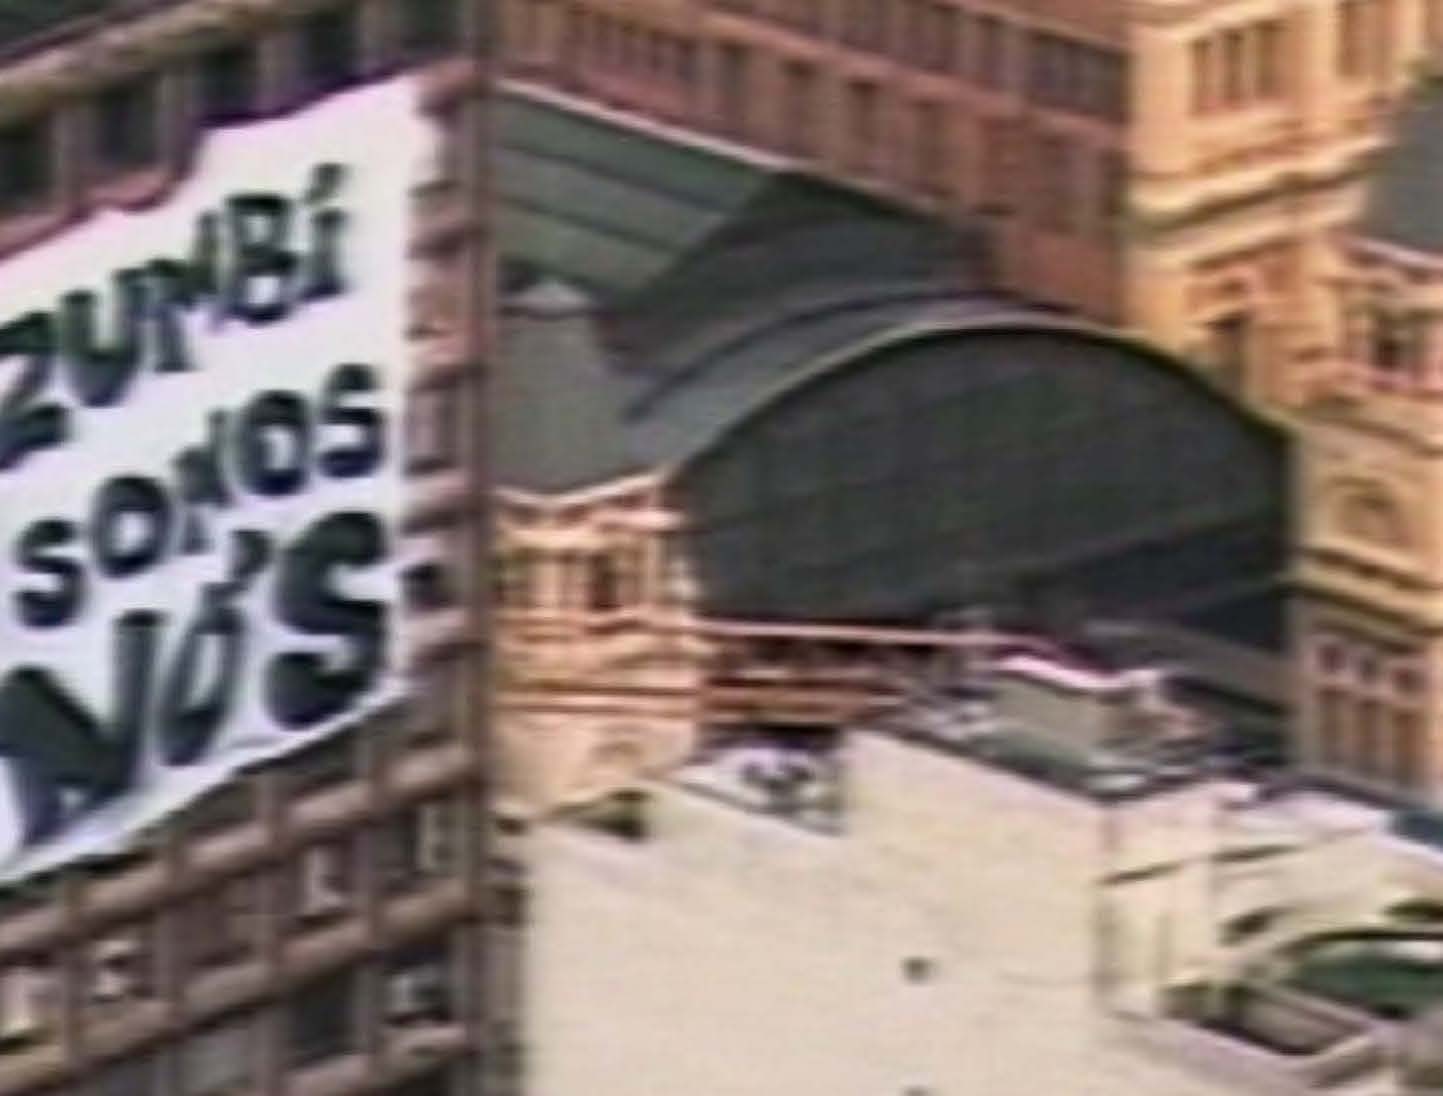 Still frame from Daniel Lima and Amílcar Patel’s documentary film ‘Zumbi Somos Nós’ (‘We are Zumbi’) screened on A4’s ground floor. An image of a cityscape with a large white banner hanging from a building on the left that reads ‘Zumbi Somos Nós’.
